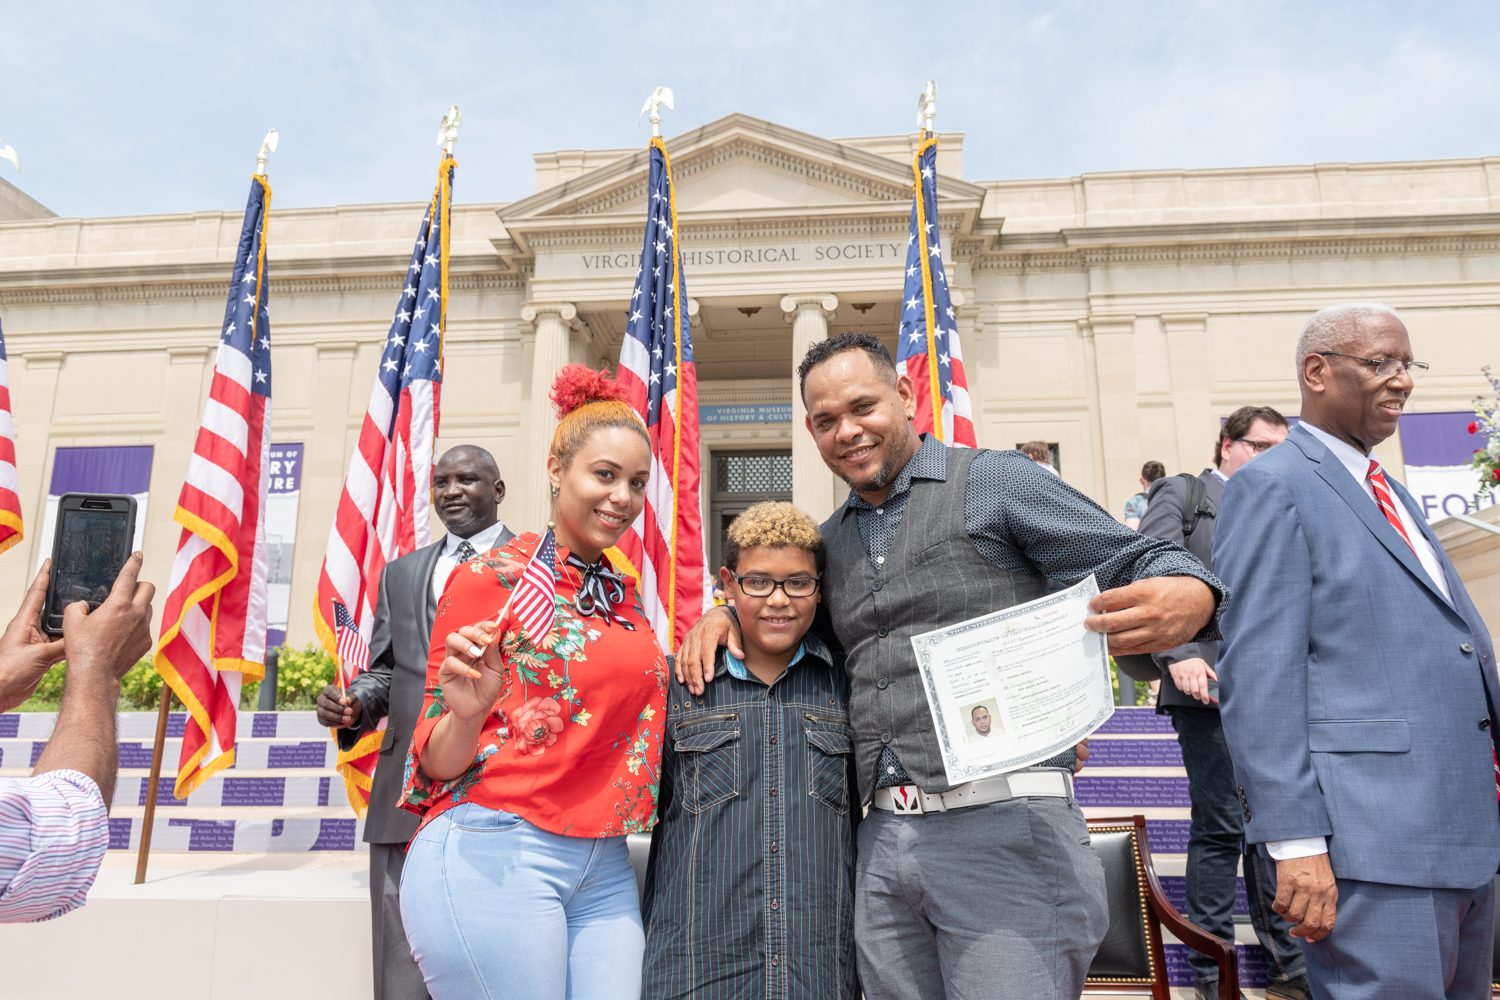 A mom, dad, and son pose on the steps of the VMHC in front of US flags holding a certificate 